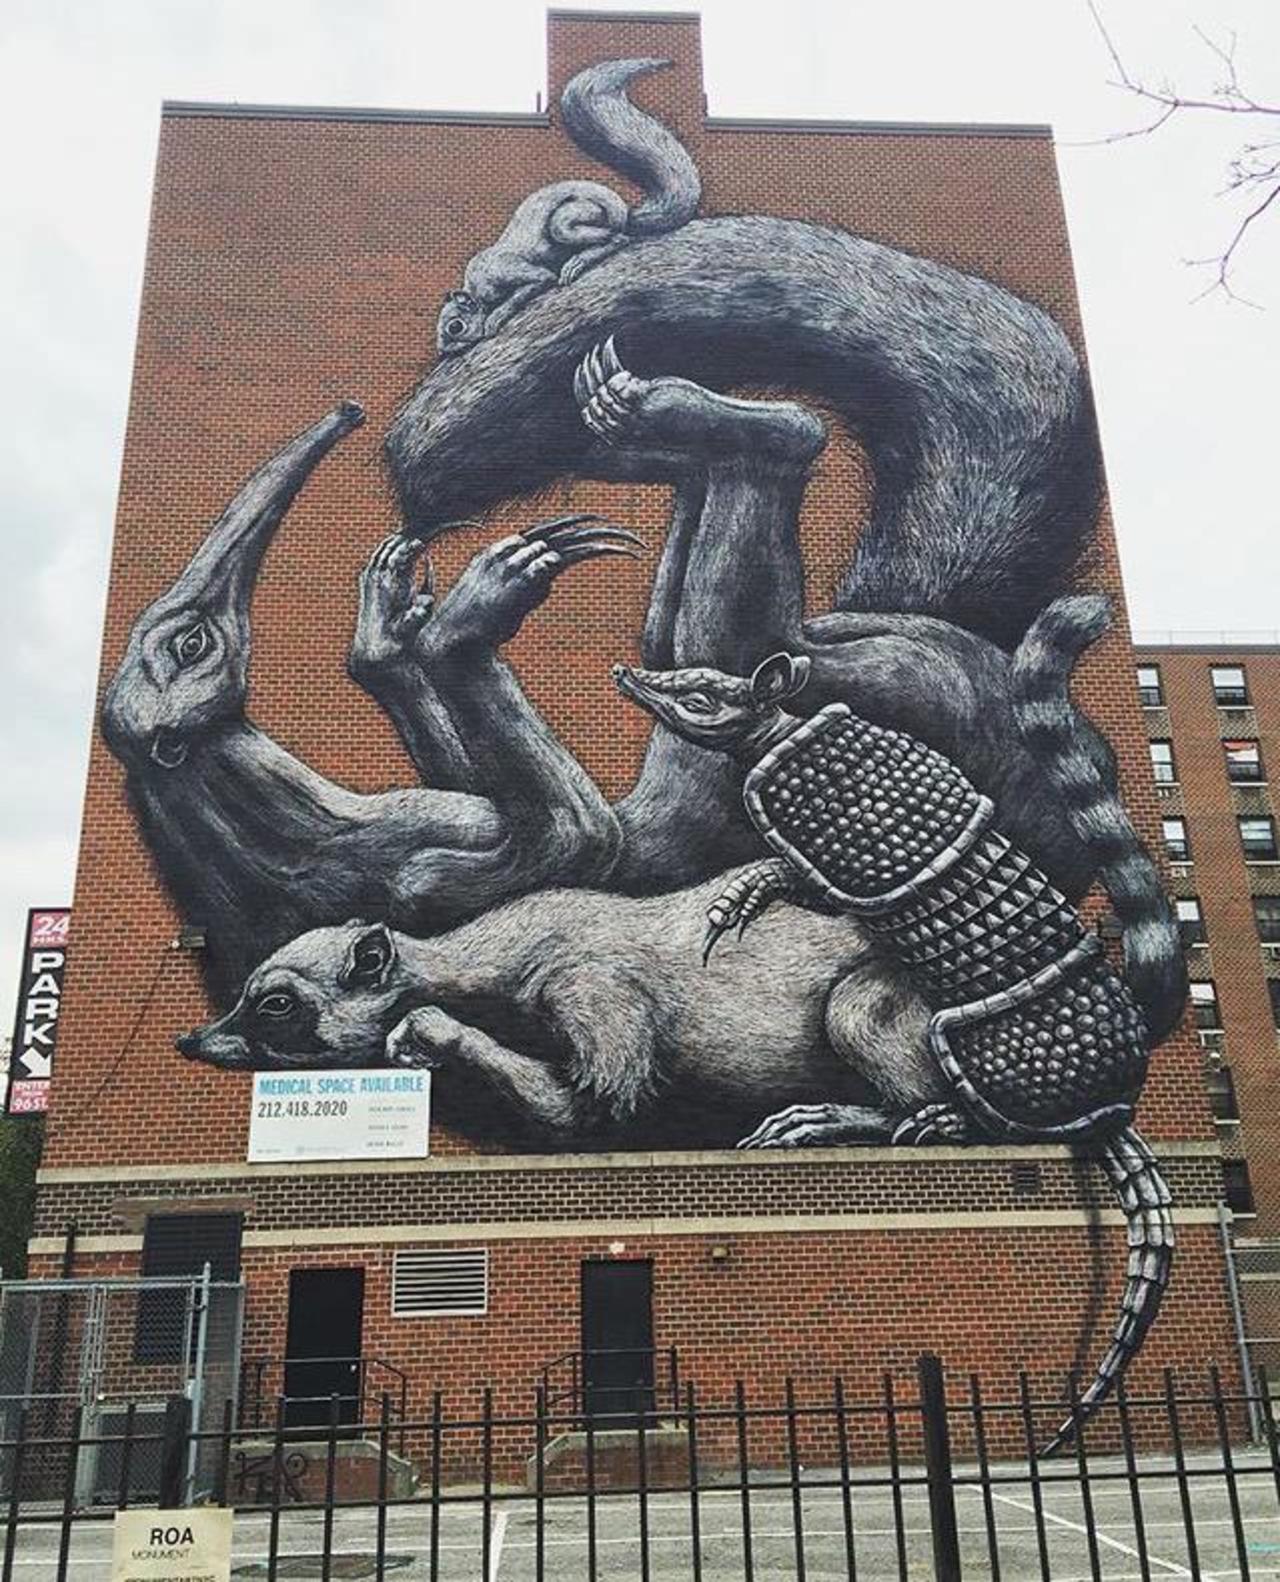 The completed new large scale Street Art wall by ROA in NYC

#art #graffiti #mural #streetart http://t.co/uIClSCvNjC